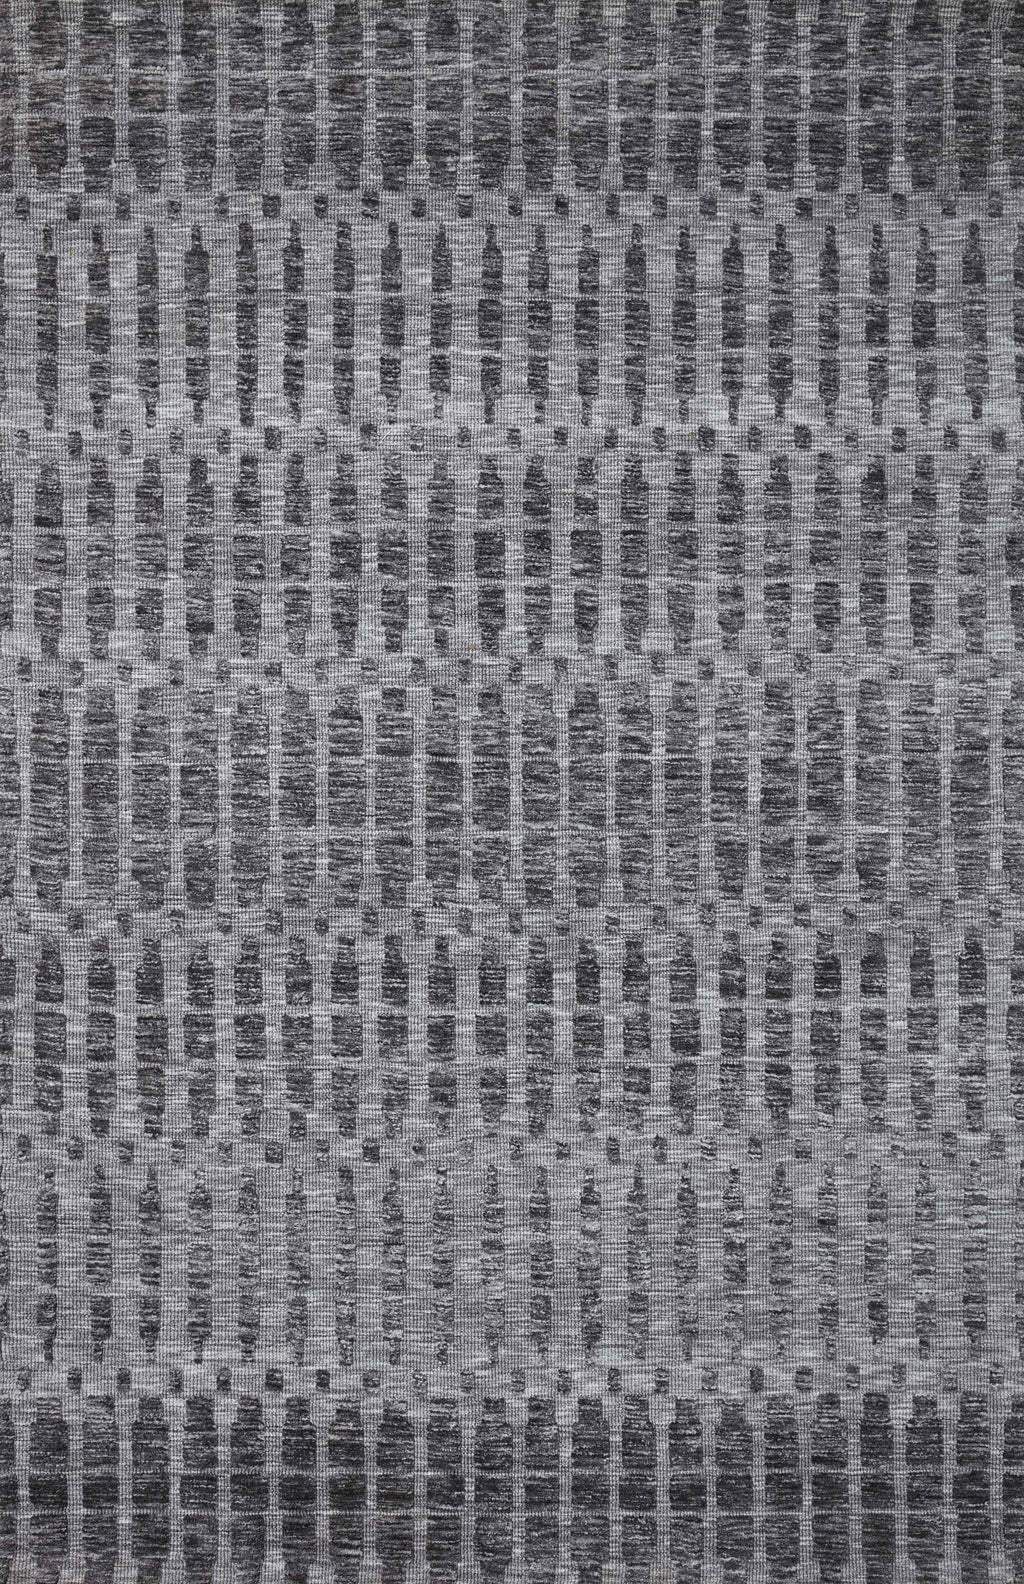 YESHAIA Collection Rug  in  GREY / CHARCOAL Gray Accent Power-Loomed Polyester